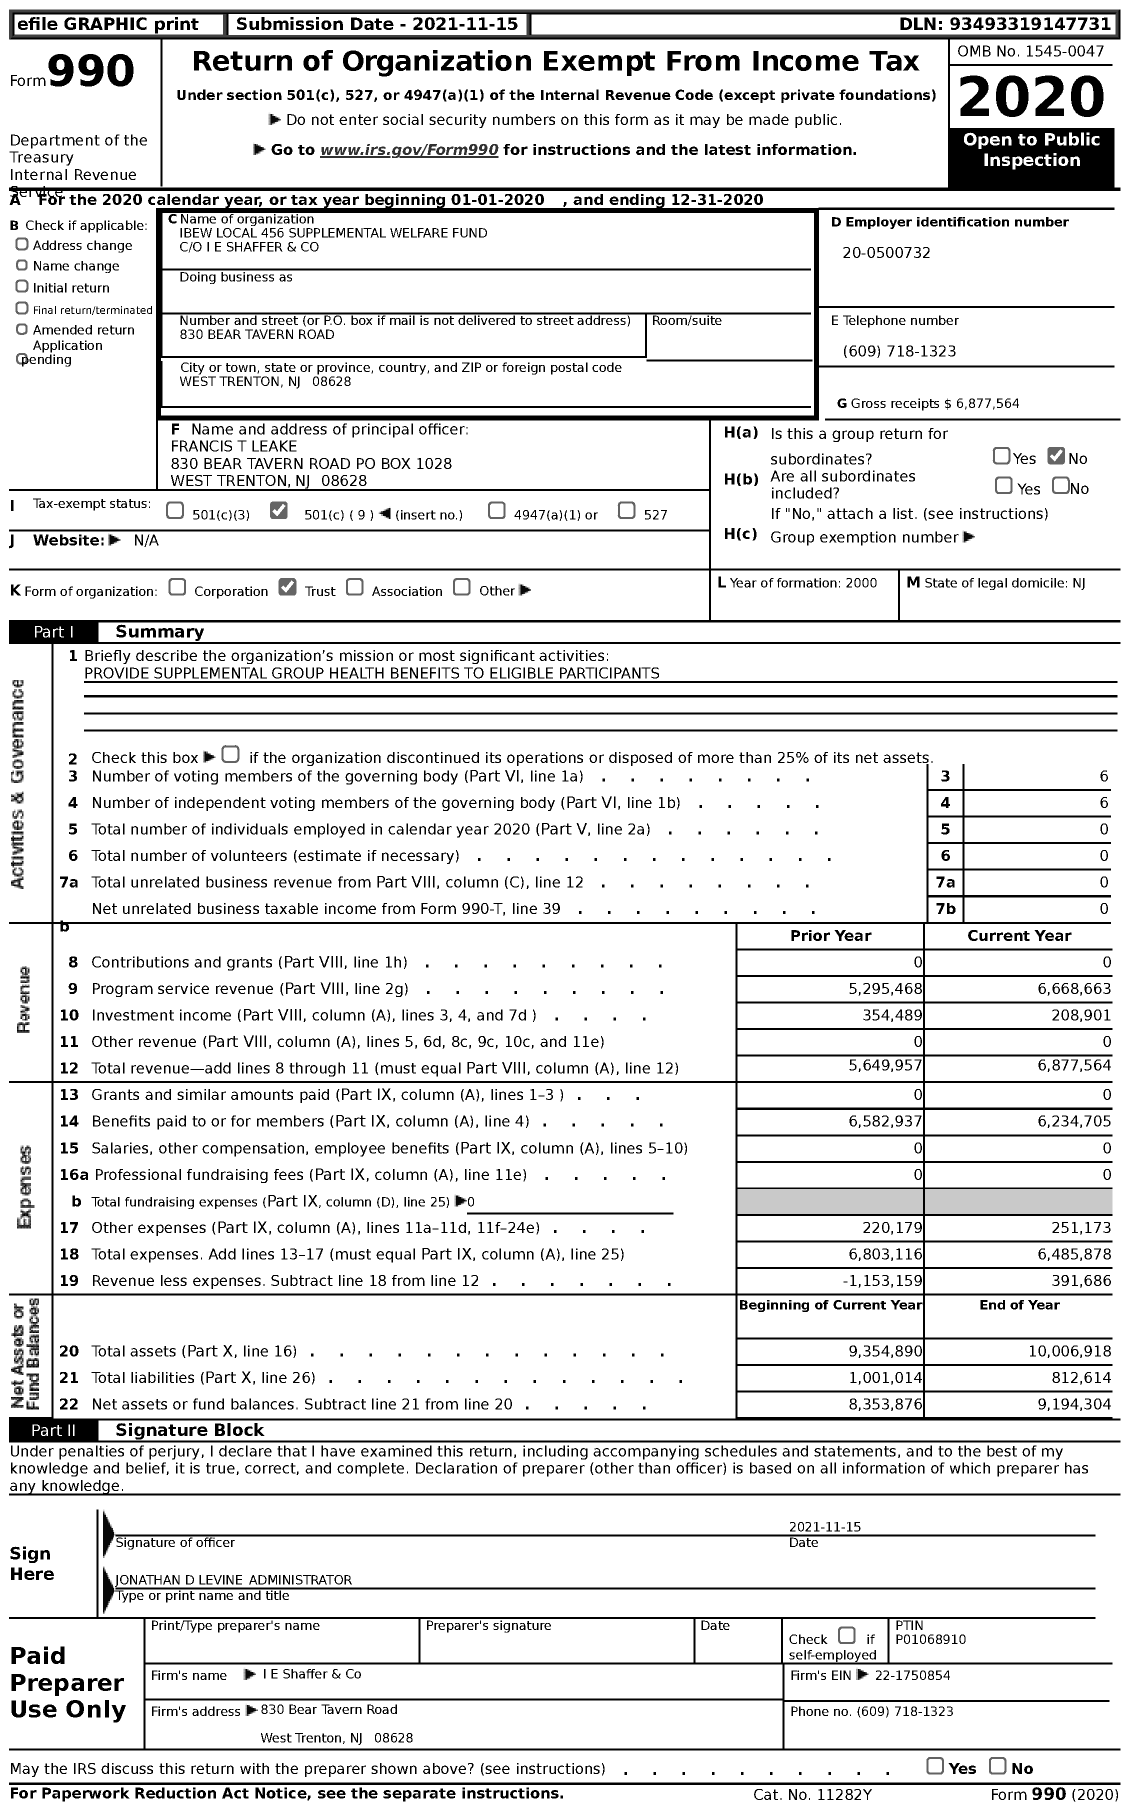 Image of first page of 2020 Form 990 for IBEW Local 456 Supplemental Welfare Fund